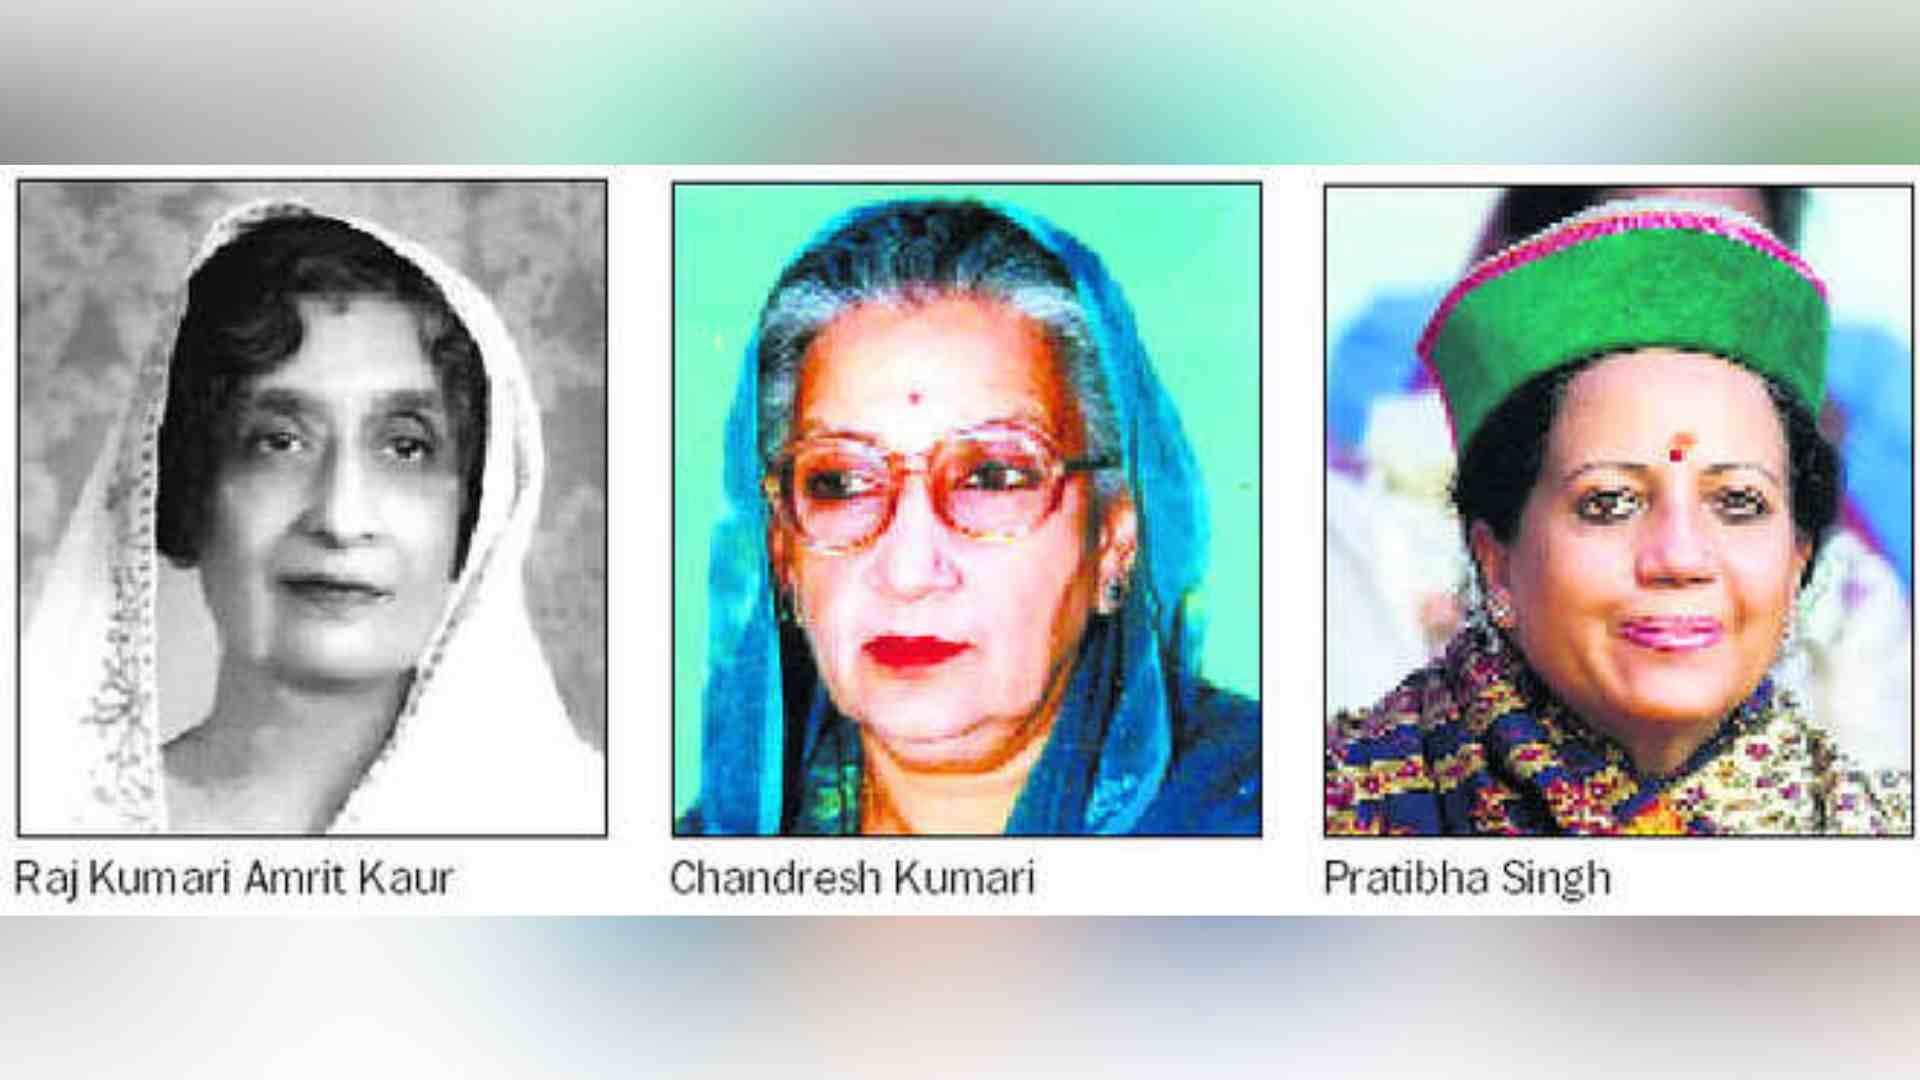 Himachal: Only 3 Women Elected To Lok Sabha In 72 Years, 8 Elected For Rajya Sabha